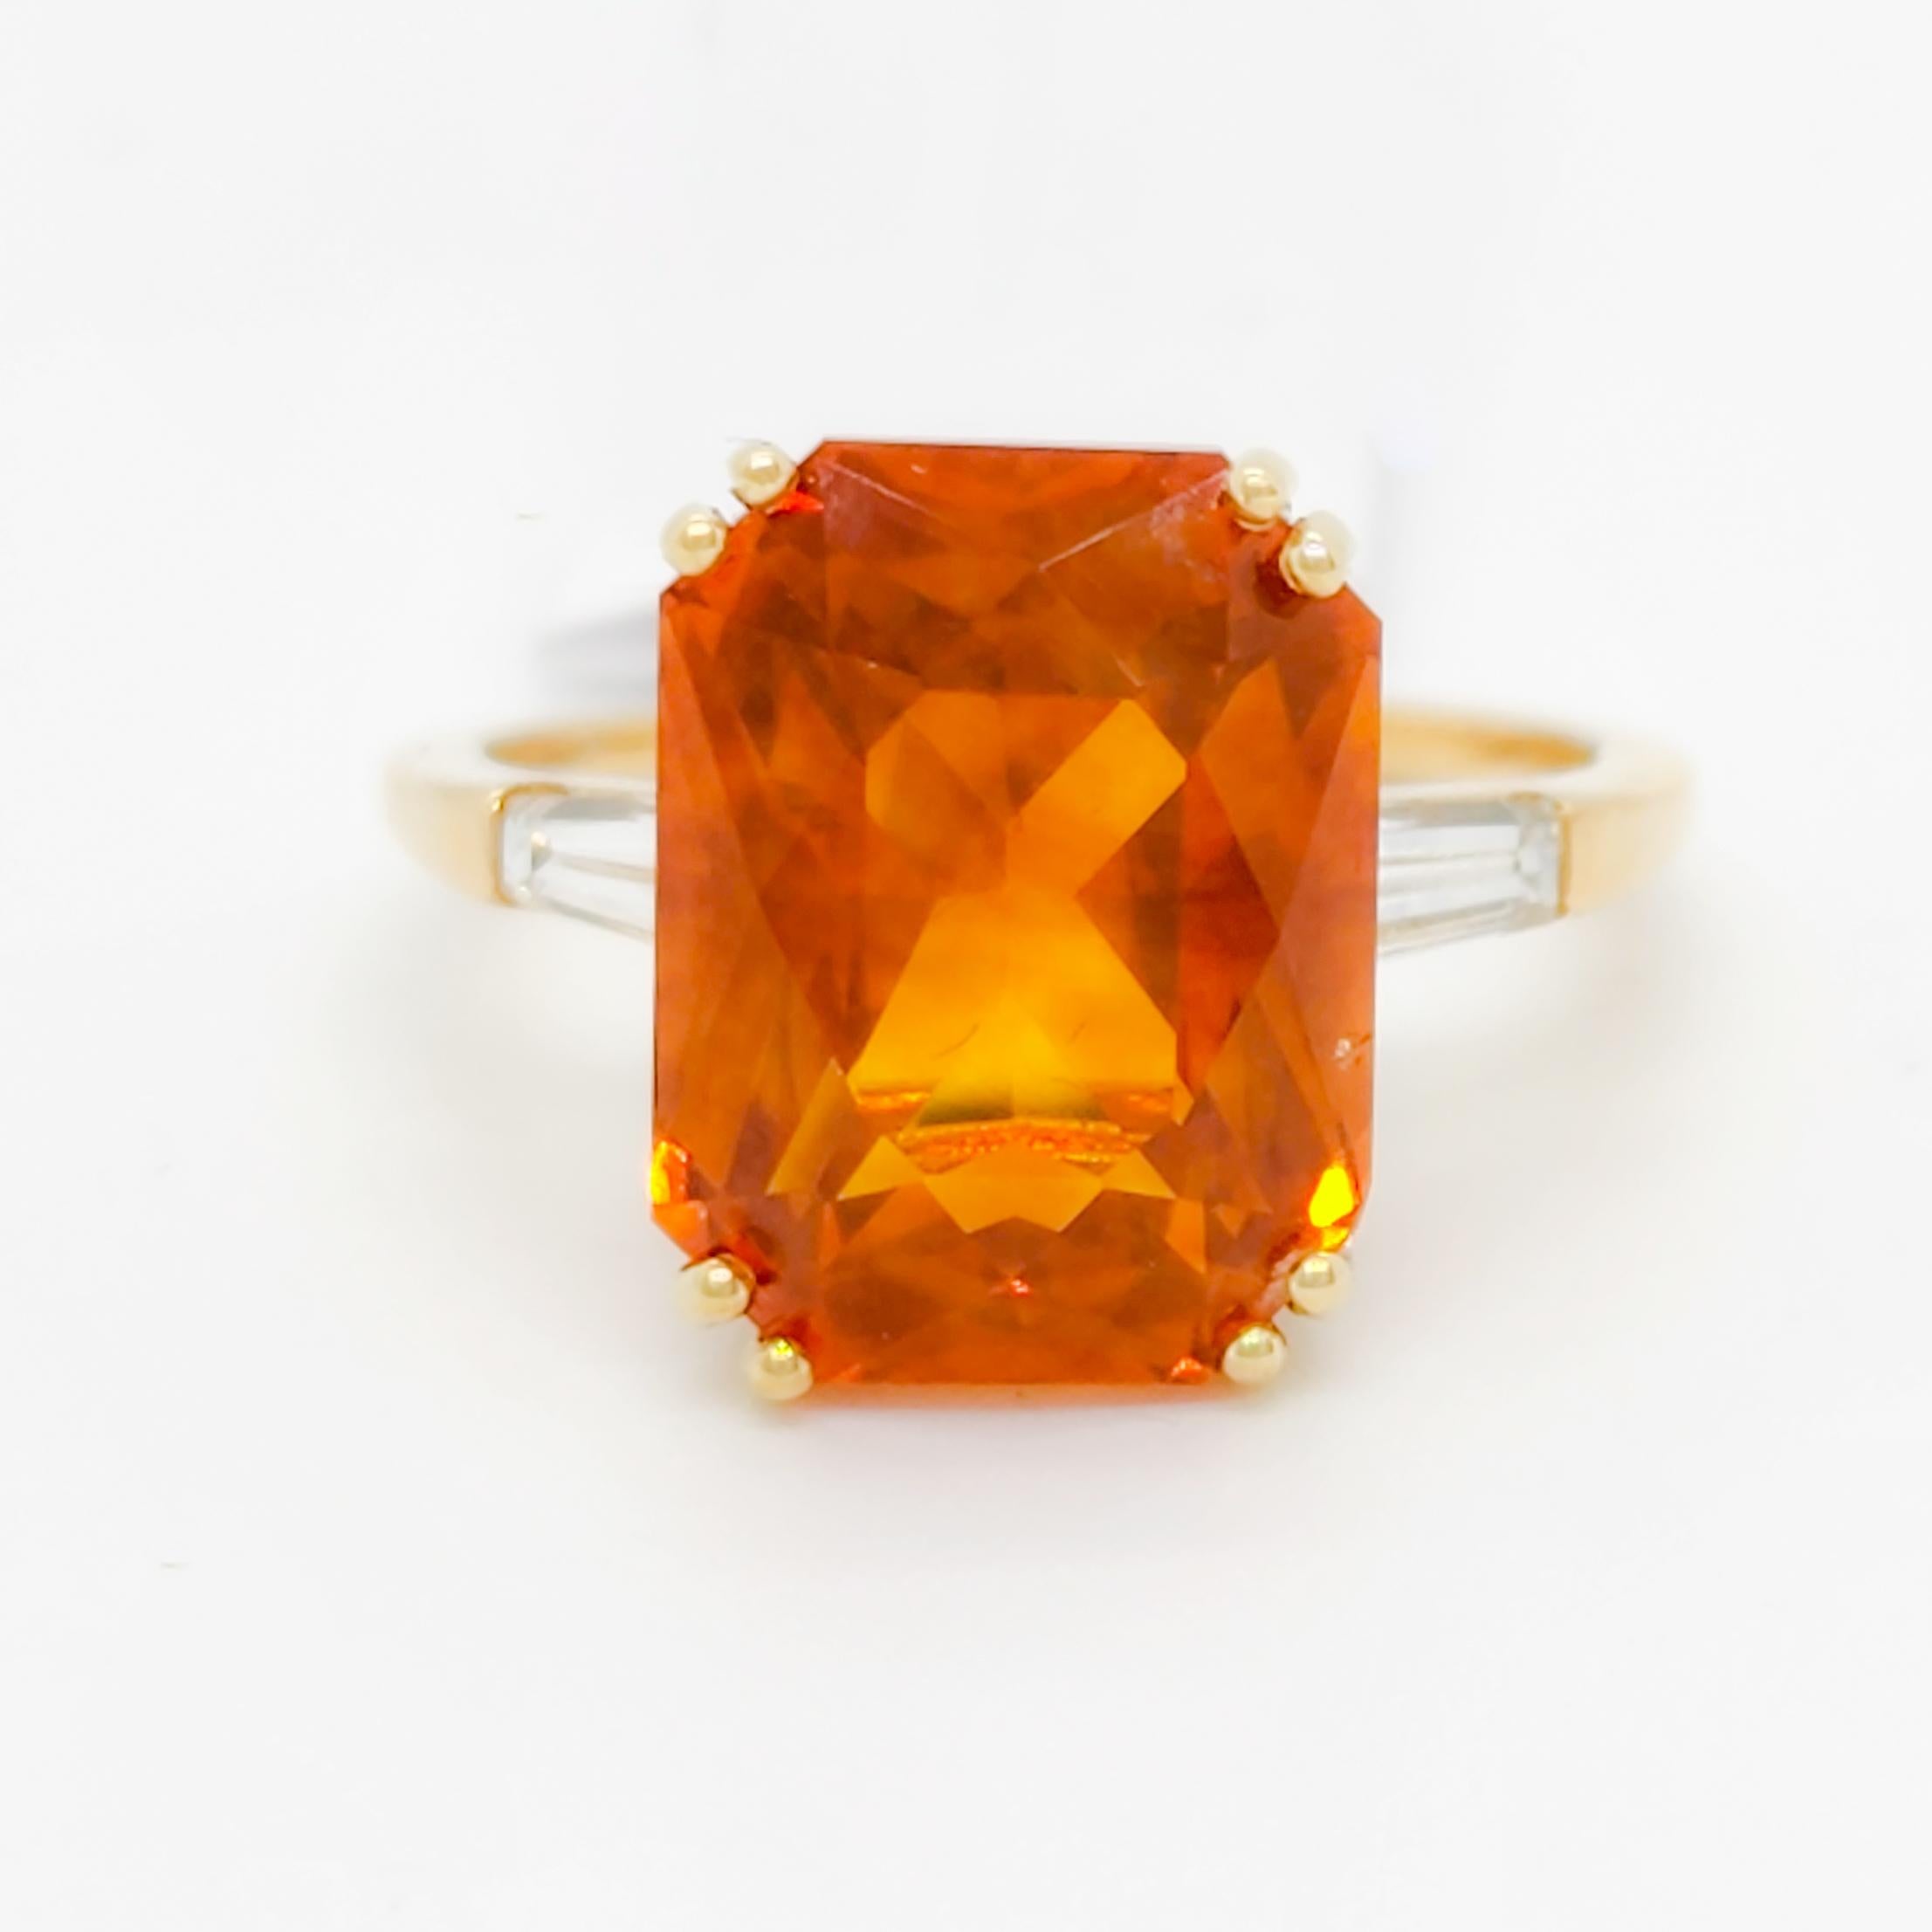 Gorgeous bright 13.04 ct. orange sapphire octagon with 0.20 ct. good quality white diamond baguettes.  Handmade in 18k yellow gold.  Ring size 8.75.  GIA certificate included.